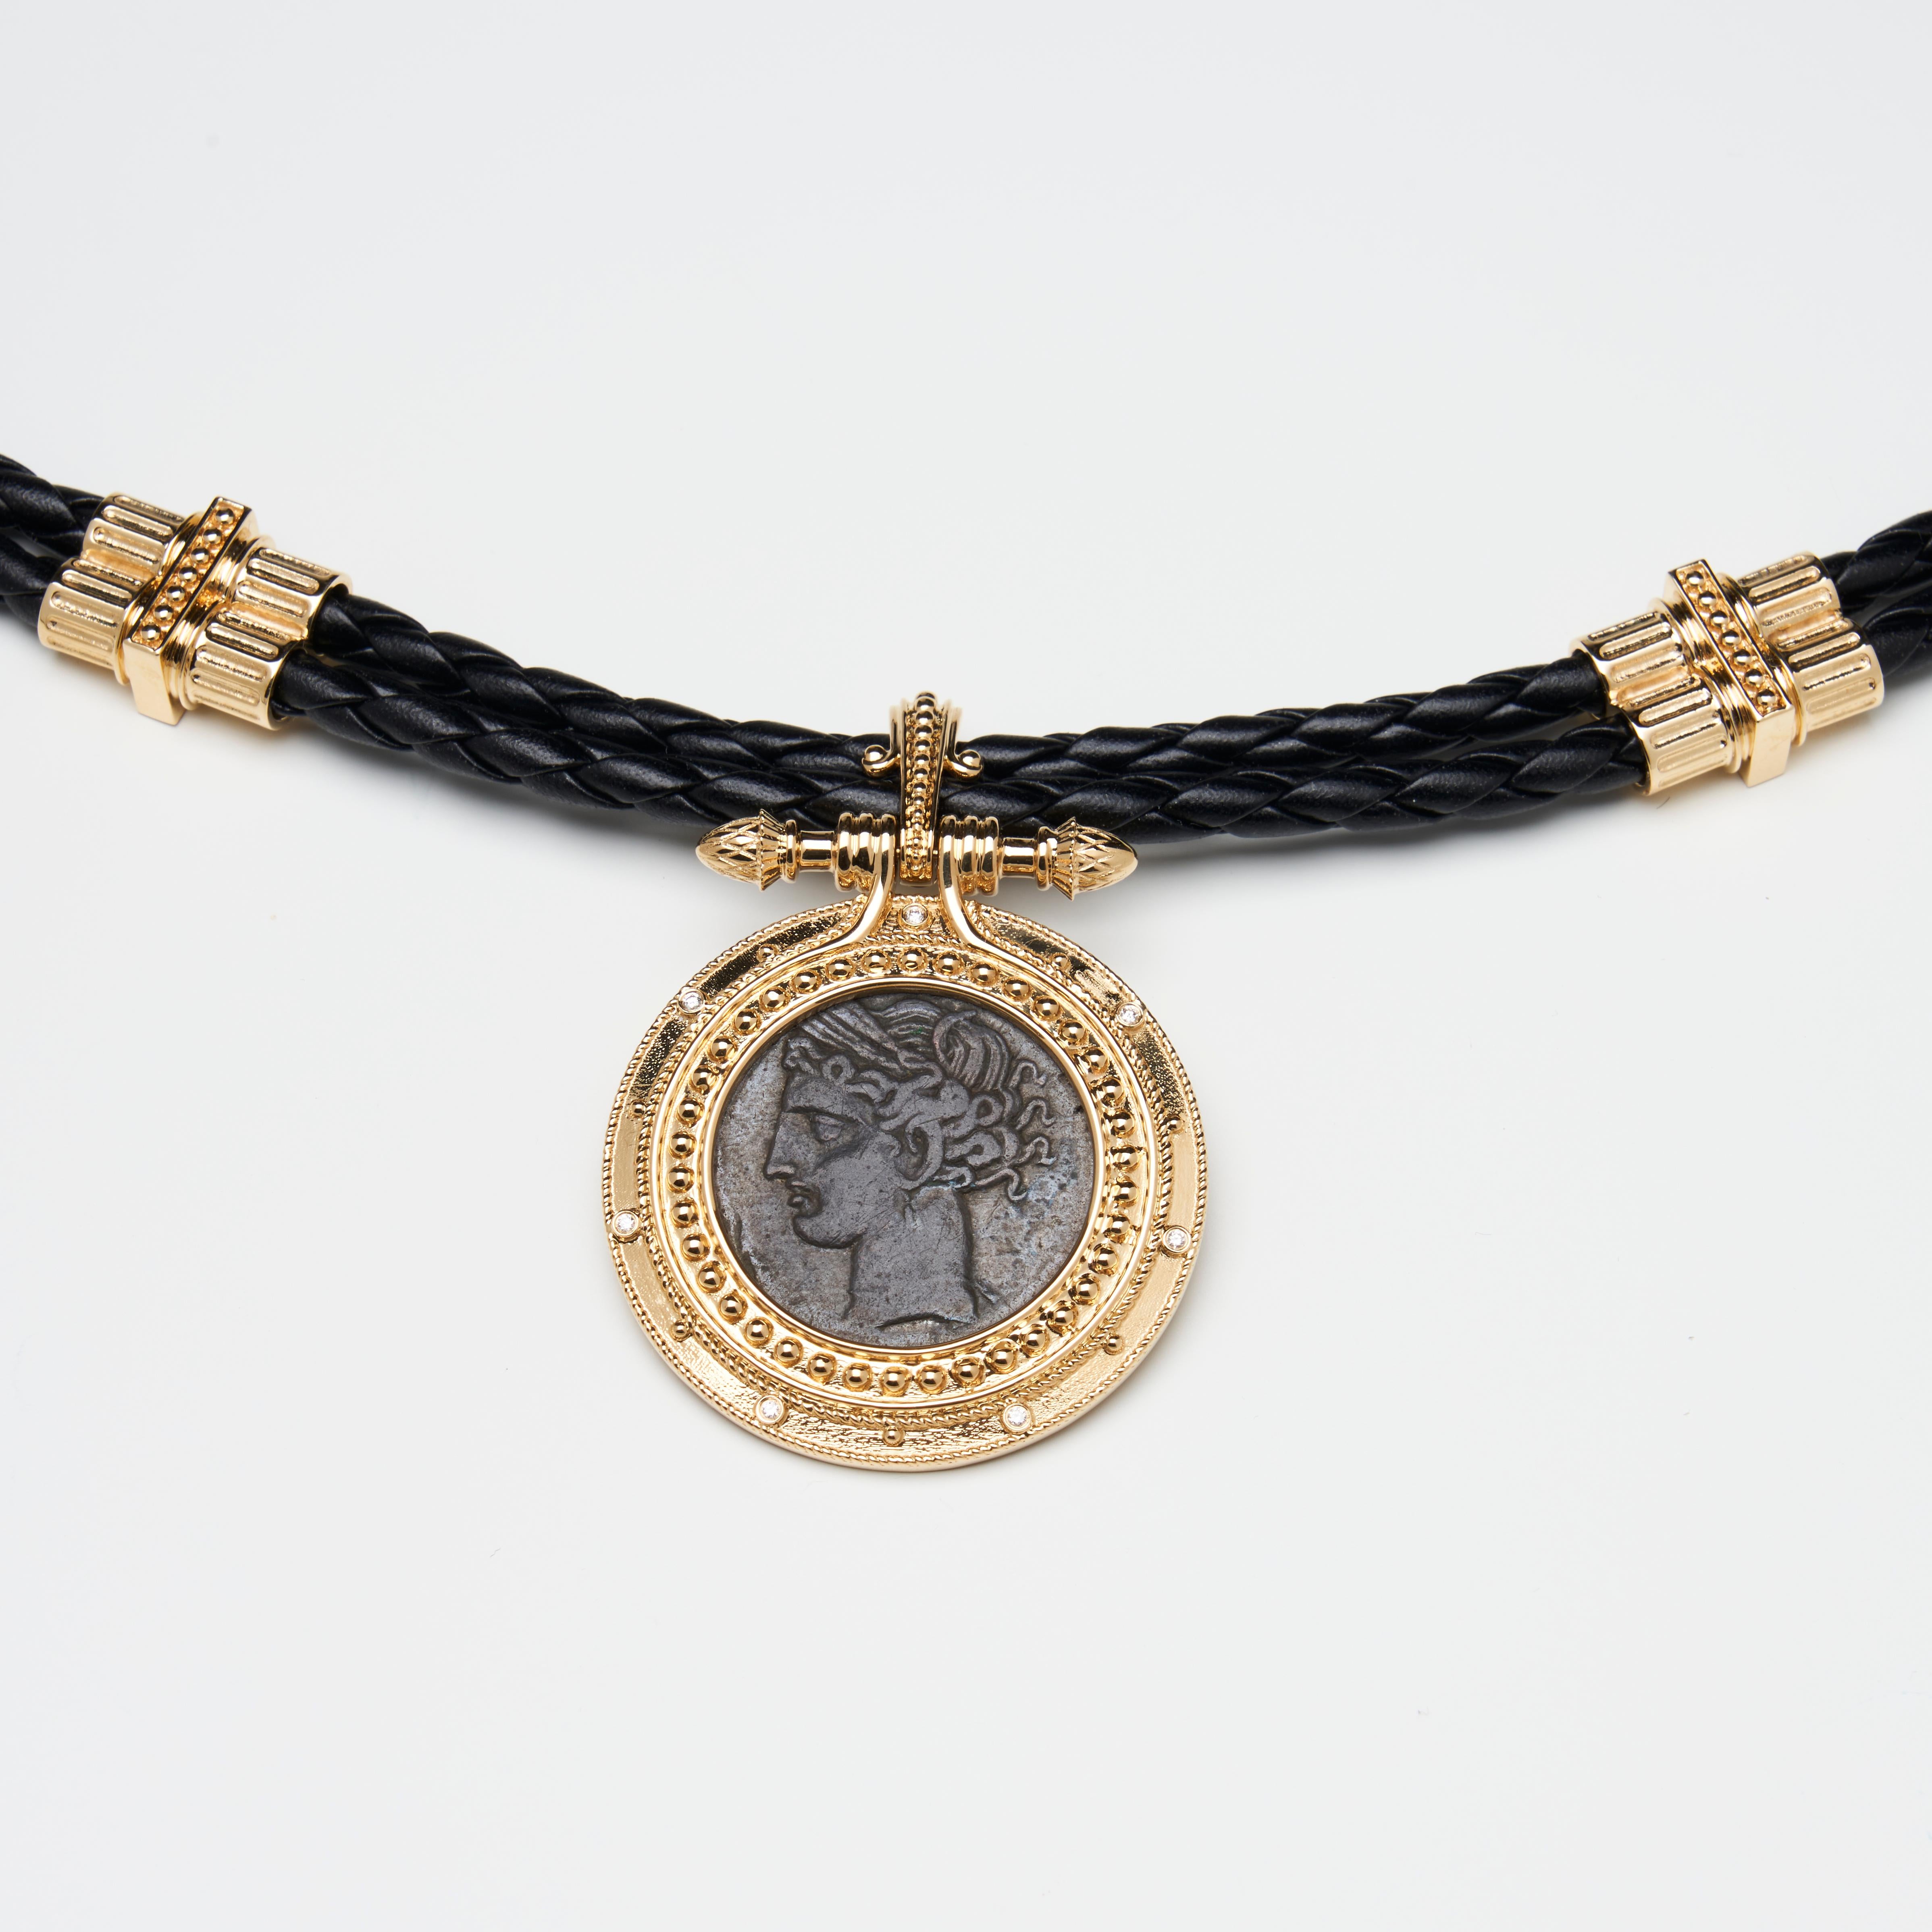 18-karat yellow gold pendant
Leather Cord with 18K gold decoration
Ancient, authentic Greek bronze coin of the head of Tanit center inset. Tanit coin from ancient Carthage from 300-264 B.C
Decorate with white diamonds
The total weight of the pendant